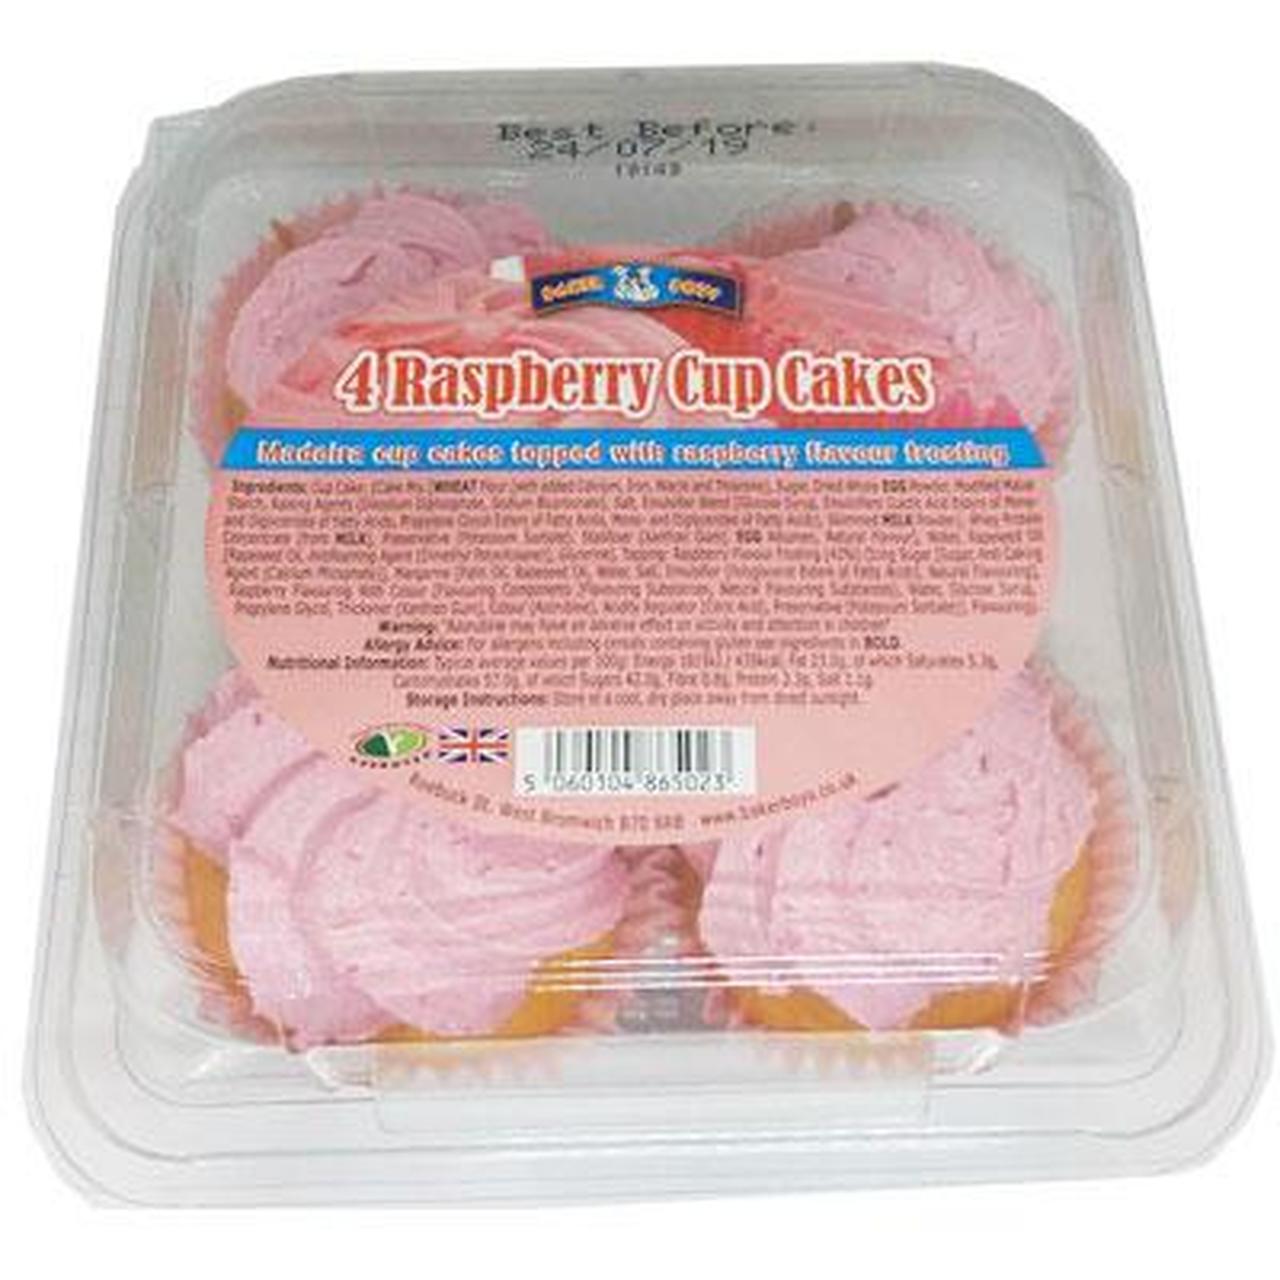 Baker Boys 4 Raspberry Cup Cakes (Jan 23 - Jan 24) RRP 1.49 CLEARANCE XL 89p or 2 for 1.50